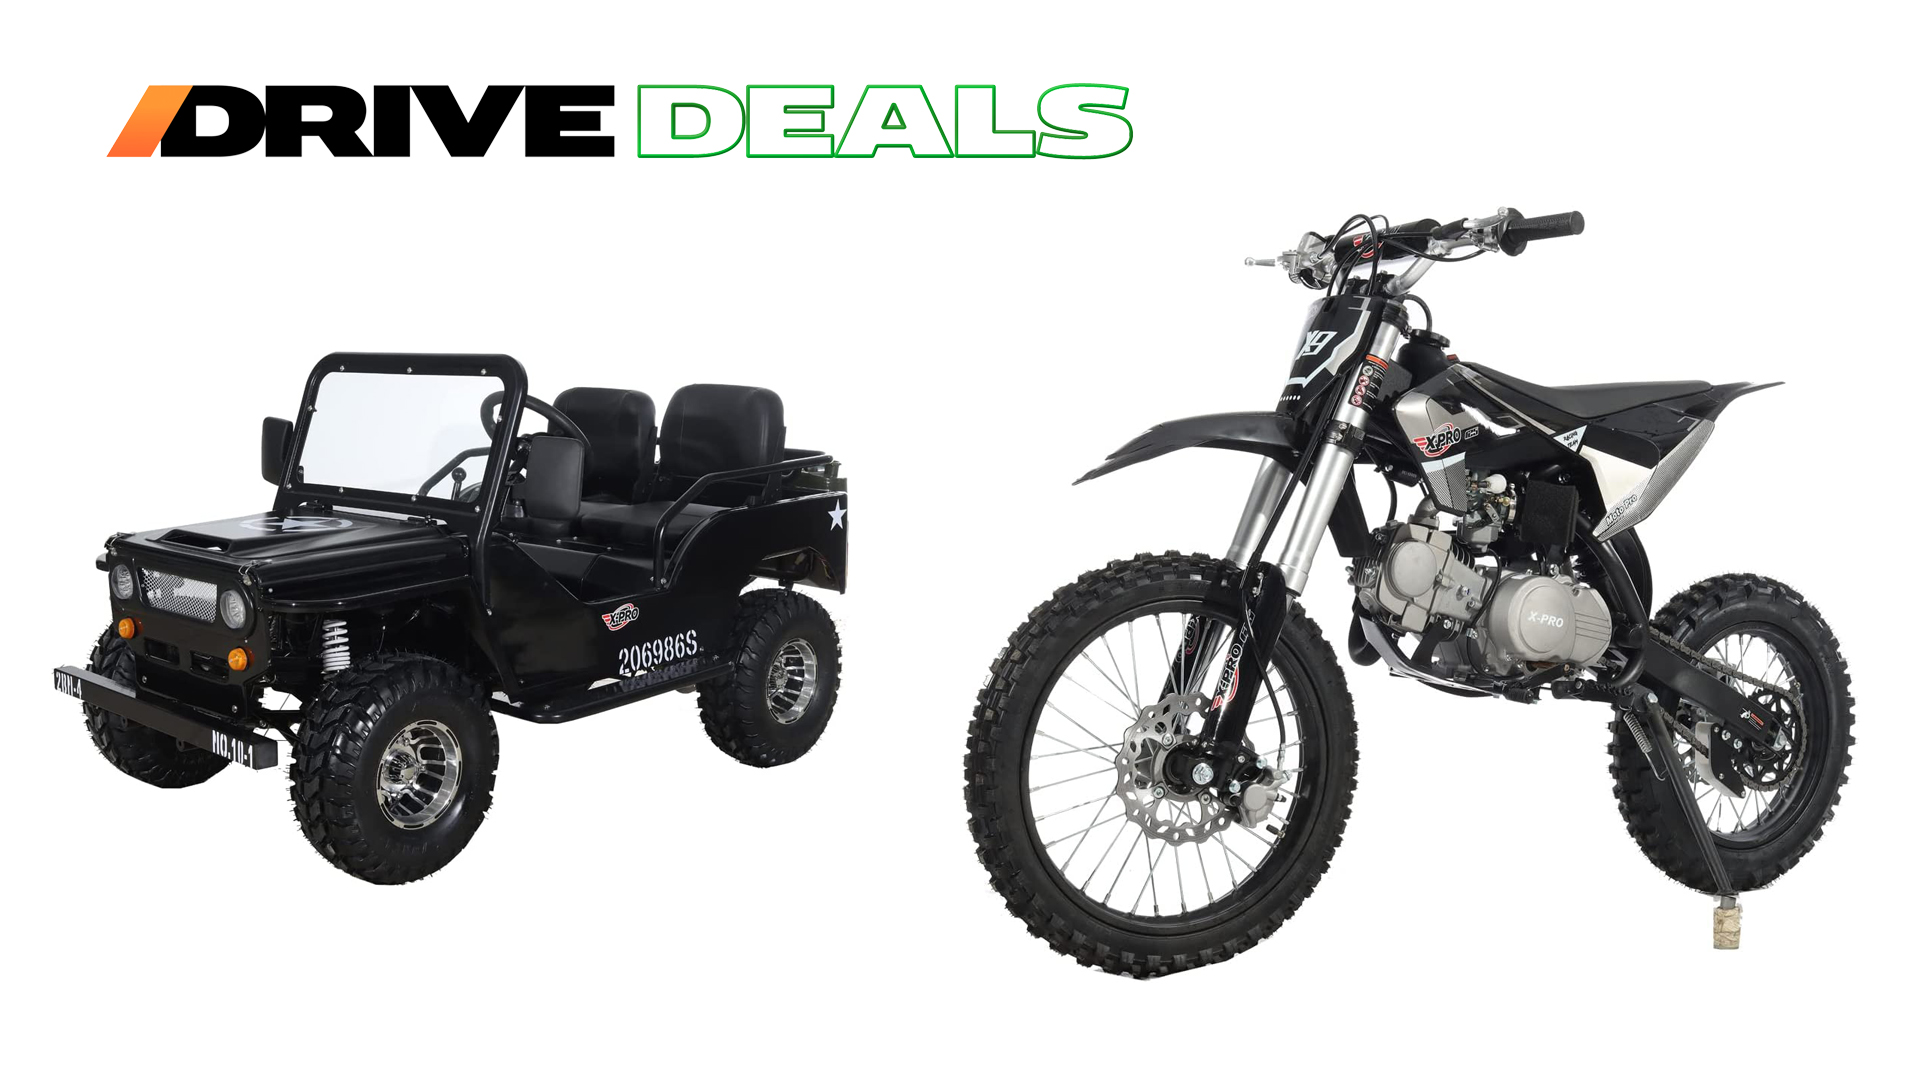 Amazon’s X-Pro Dirt Bikes and ATVs Are All On Sale This Prime Day